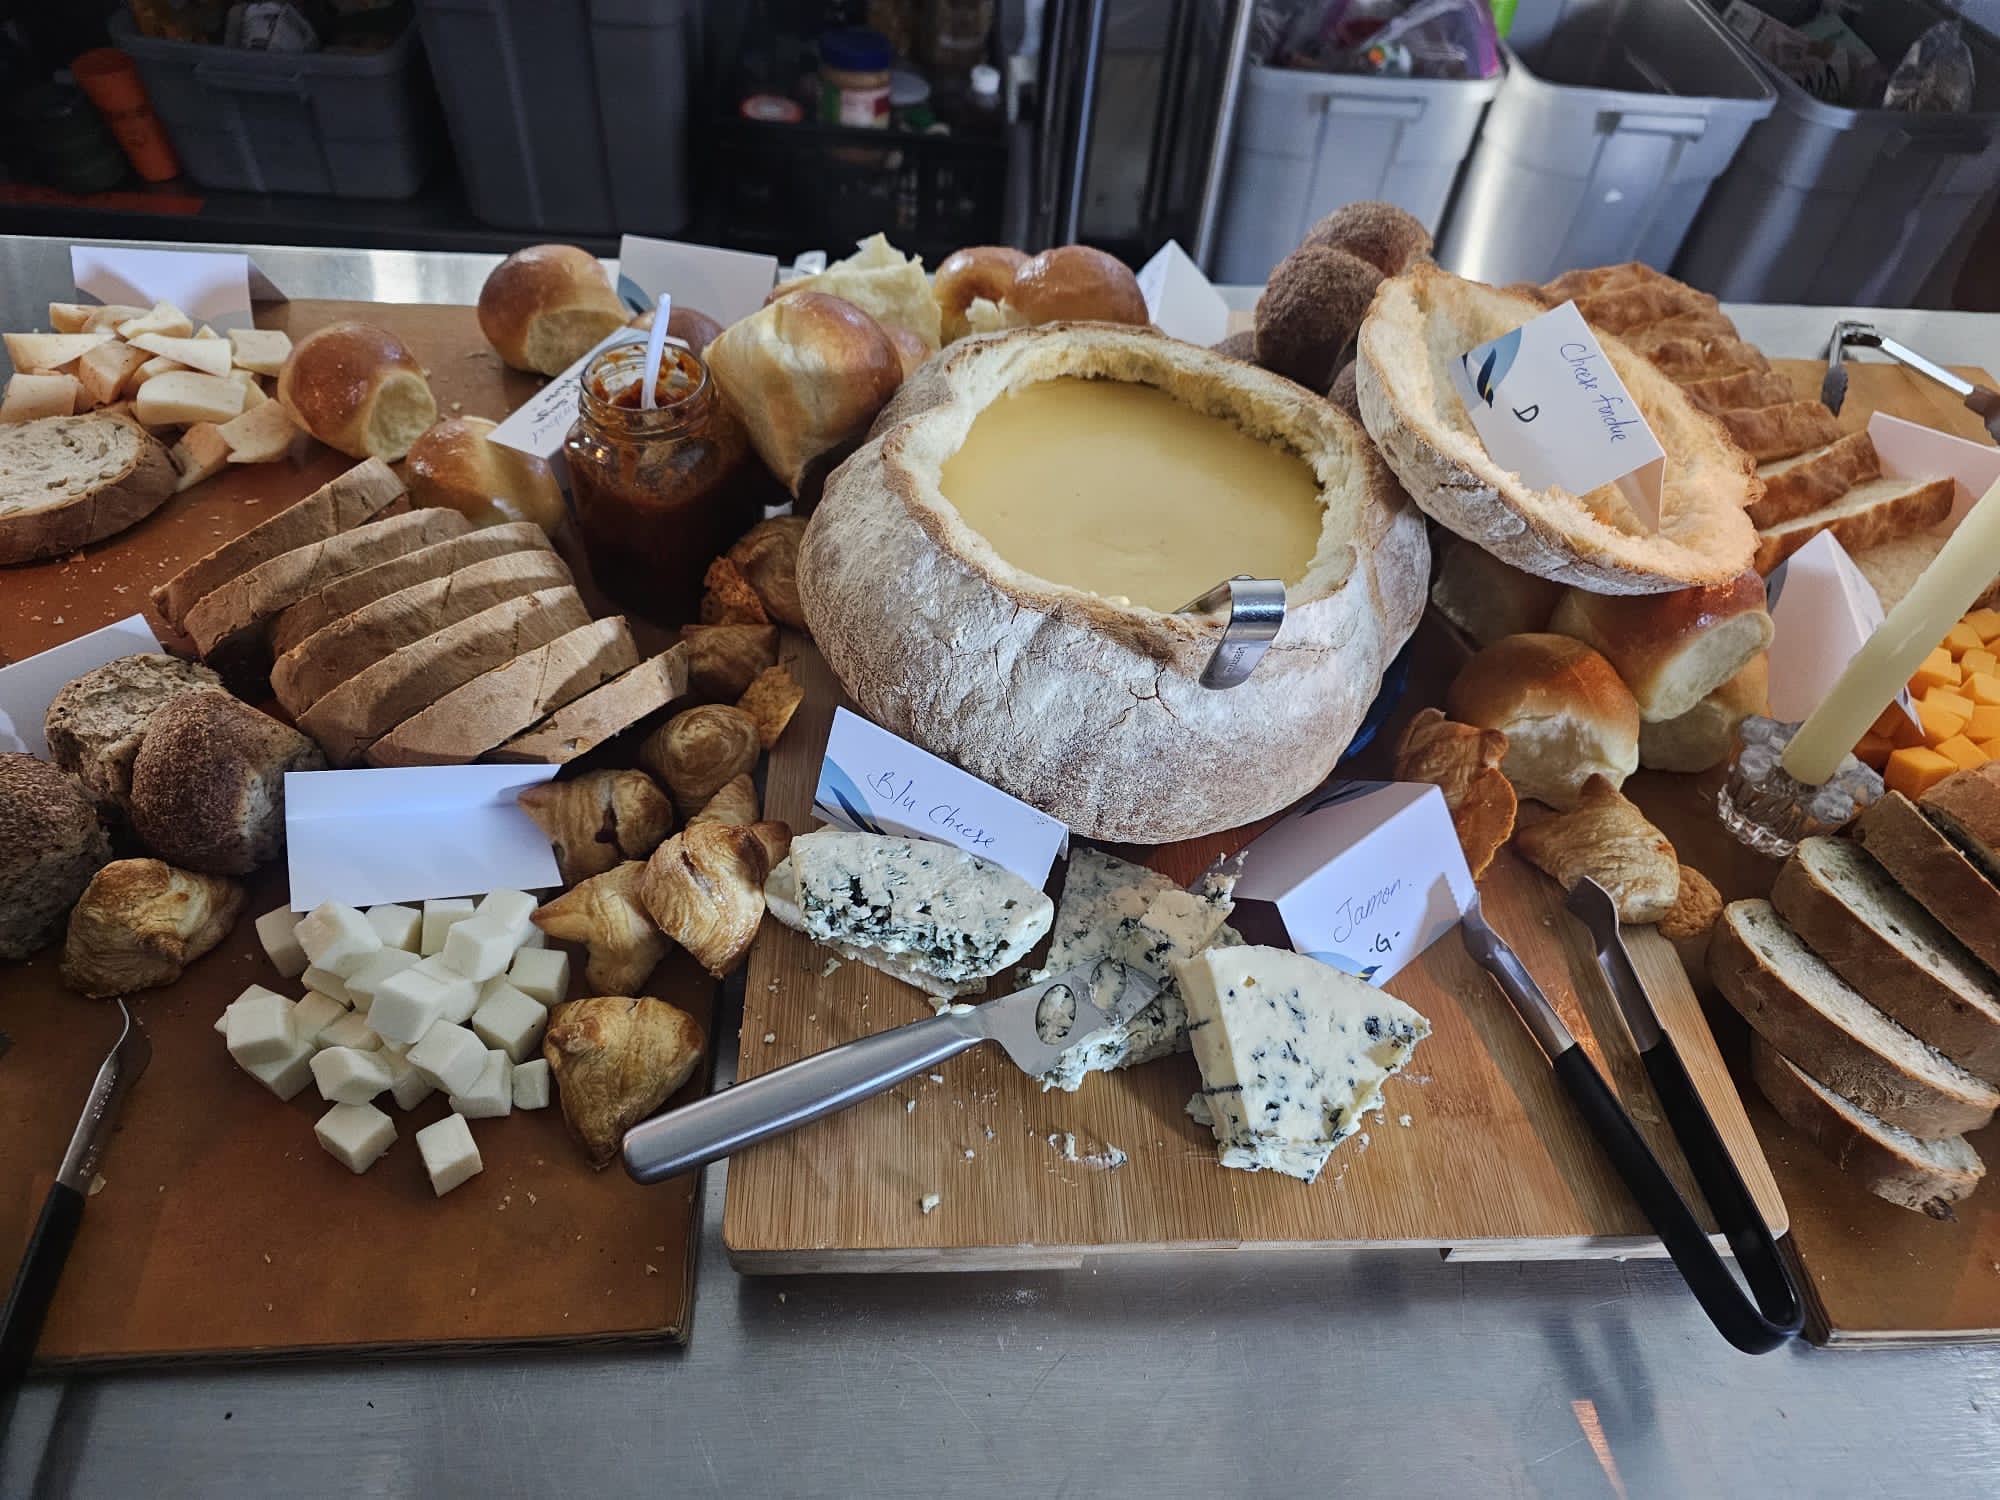 Table filled with different, breads, cheeses and spreads.